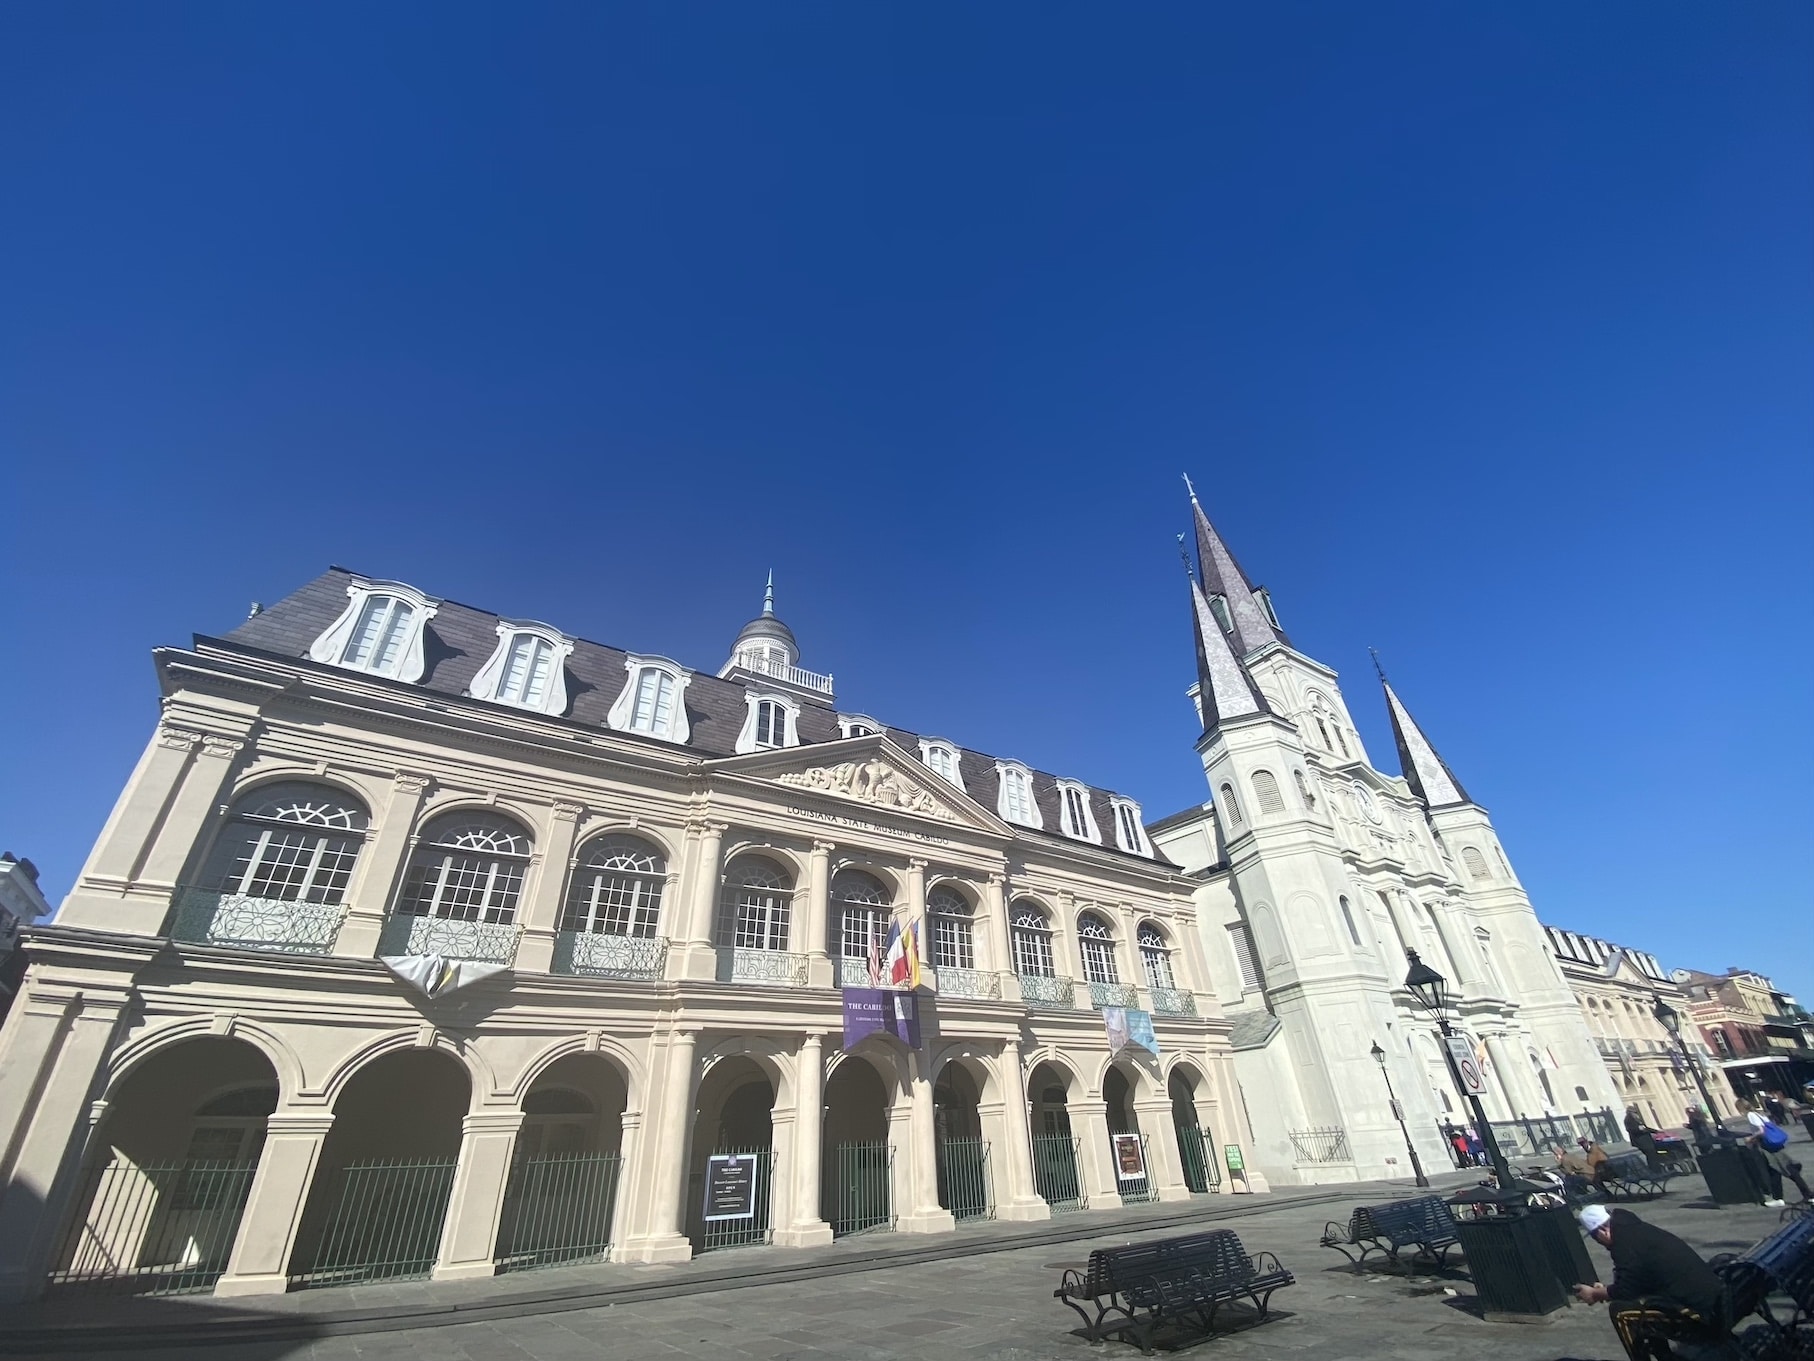 Louisiana State Museum & St Louis Cathedral - New Orleans